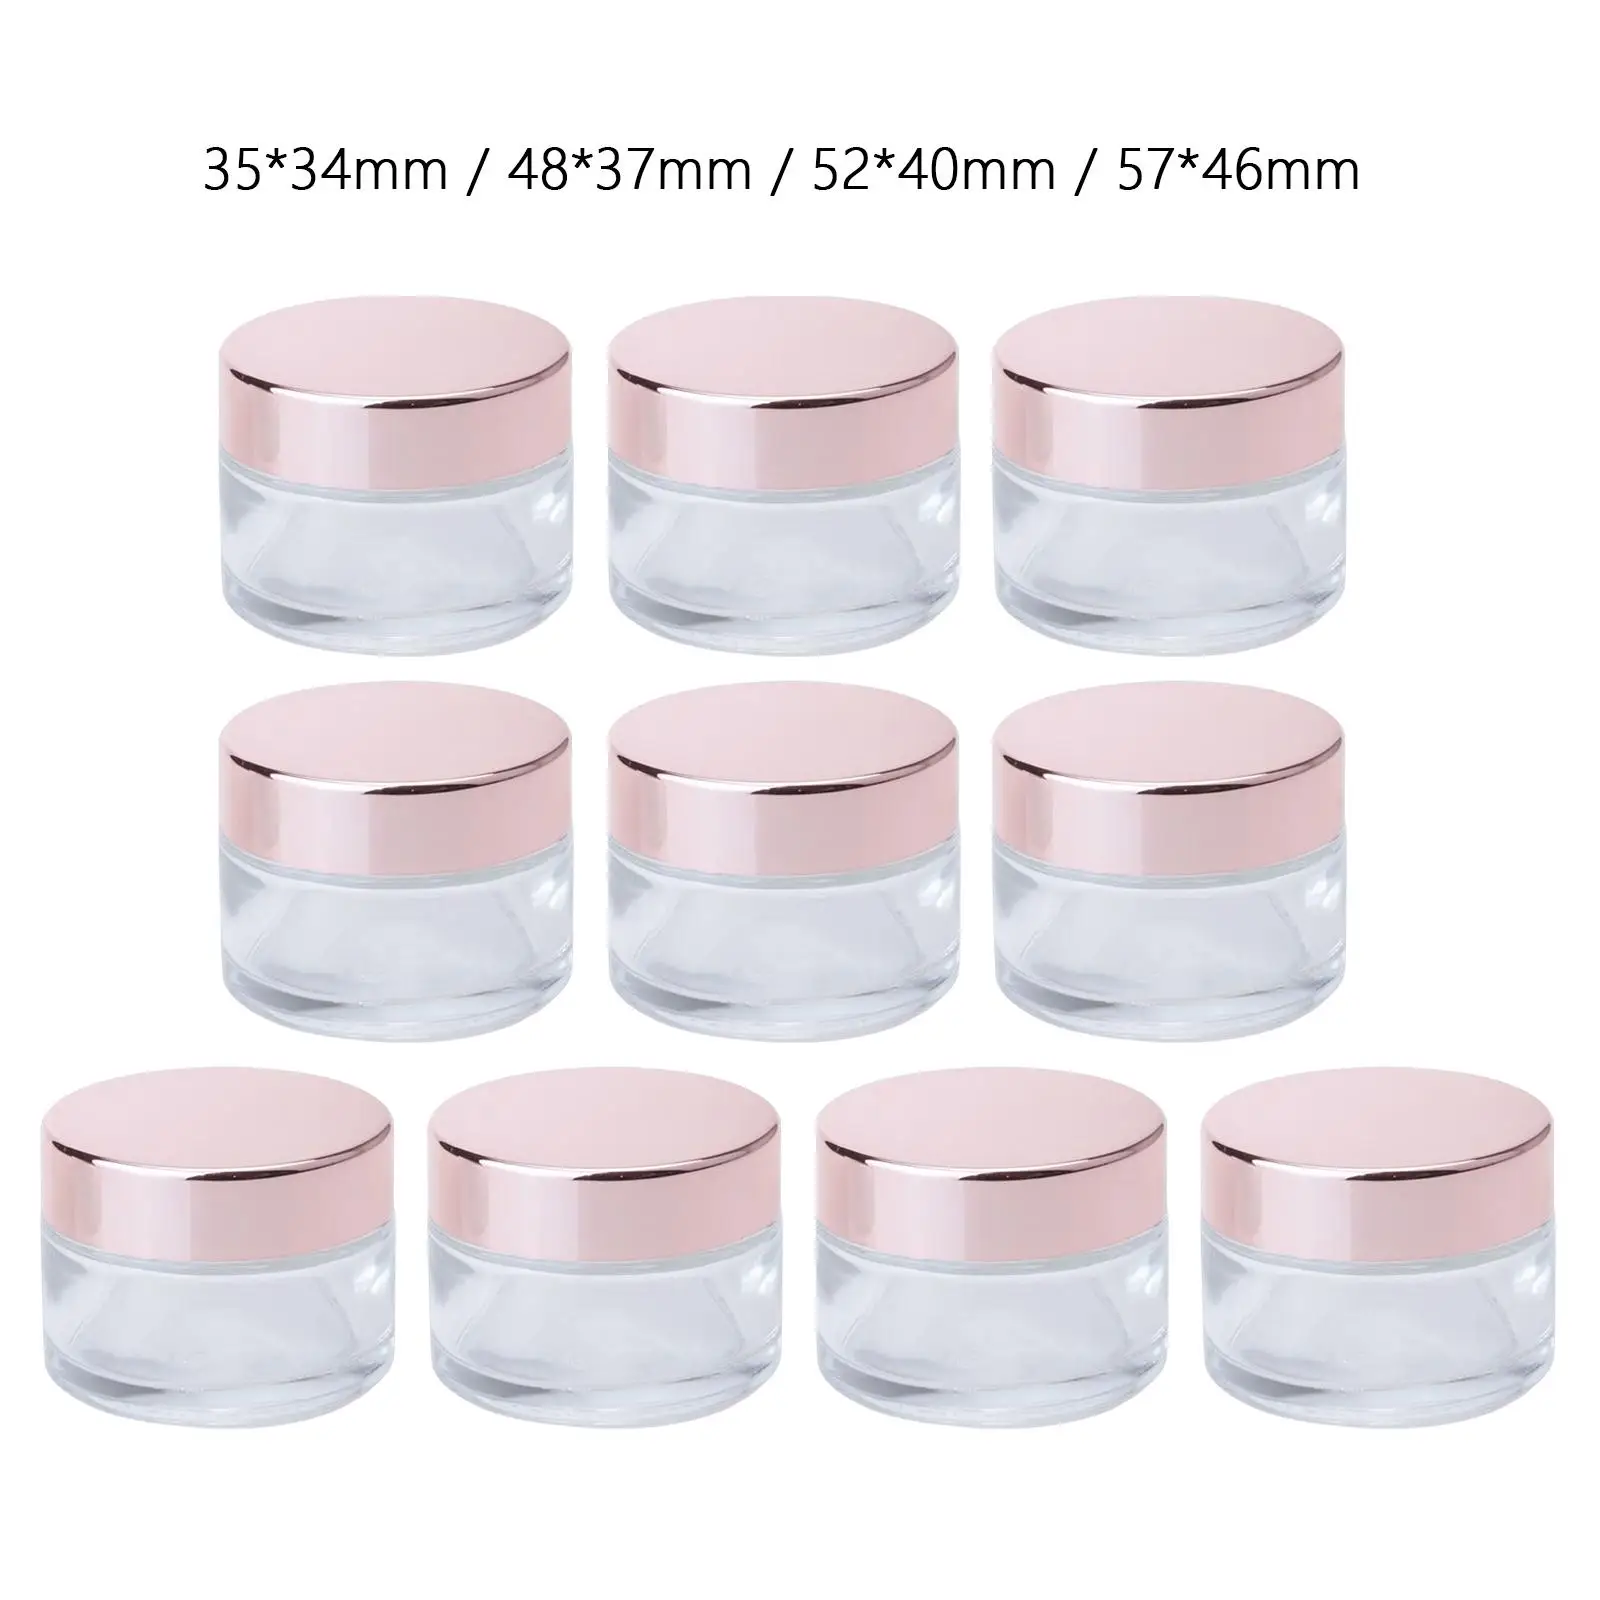 10x Empty Cosmetic Container Bottles Glass Jars Vials with Lids Round Cream Pot for Skin Care Remover Creams Eye Shadow Lotion